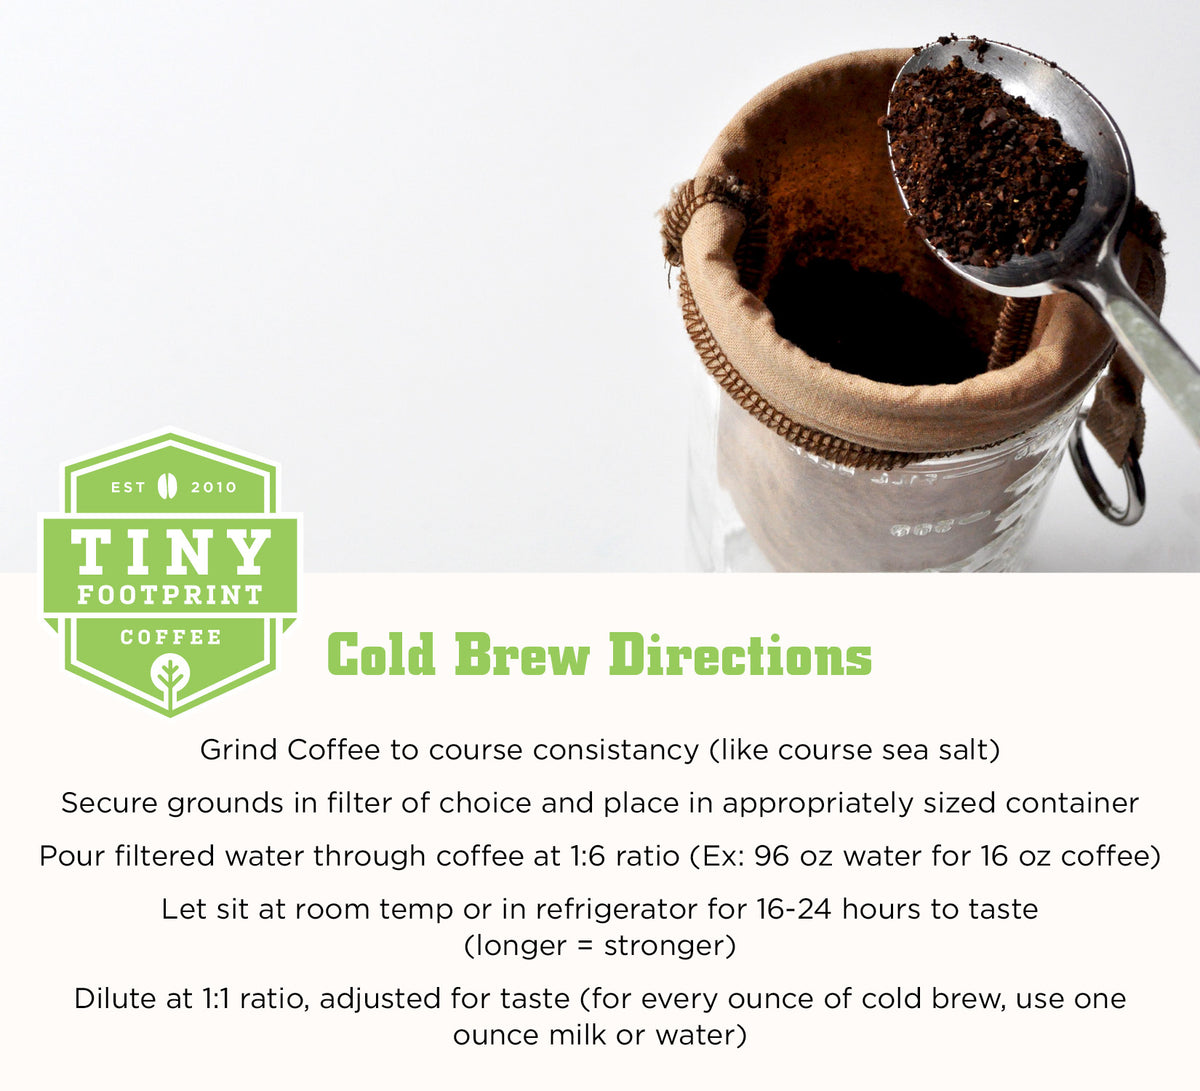 Tiny Footprint Coffee Organic Cold Press Elixir Ground 16 Ounce  855941002473 for sale online